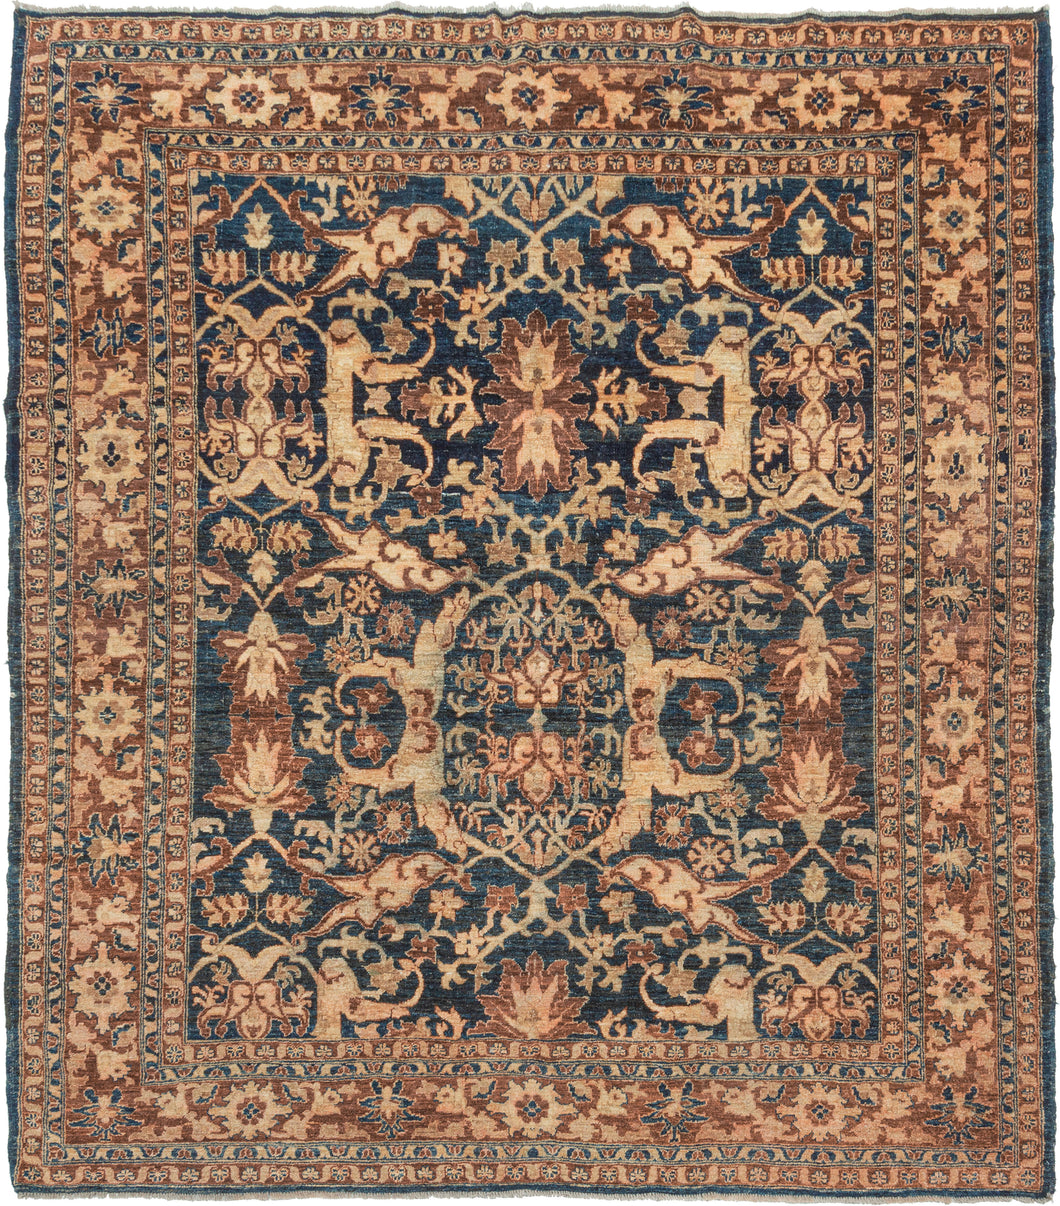 This Contemporary Afghan Mahal eatures an all-over design of curling arabesques and energetic rosettes in creamy khaki and reddish rust dancing on a deep navy ground. The pattern is more commonly associated with mahal rugs of western Iran. The rug has uneven coloring in places but flows with the design.